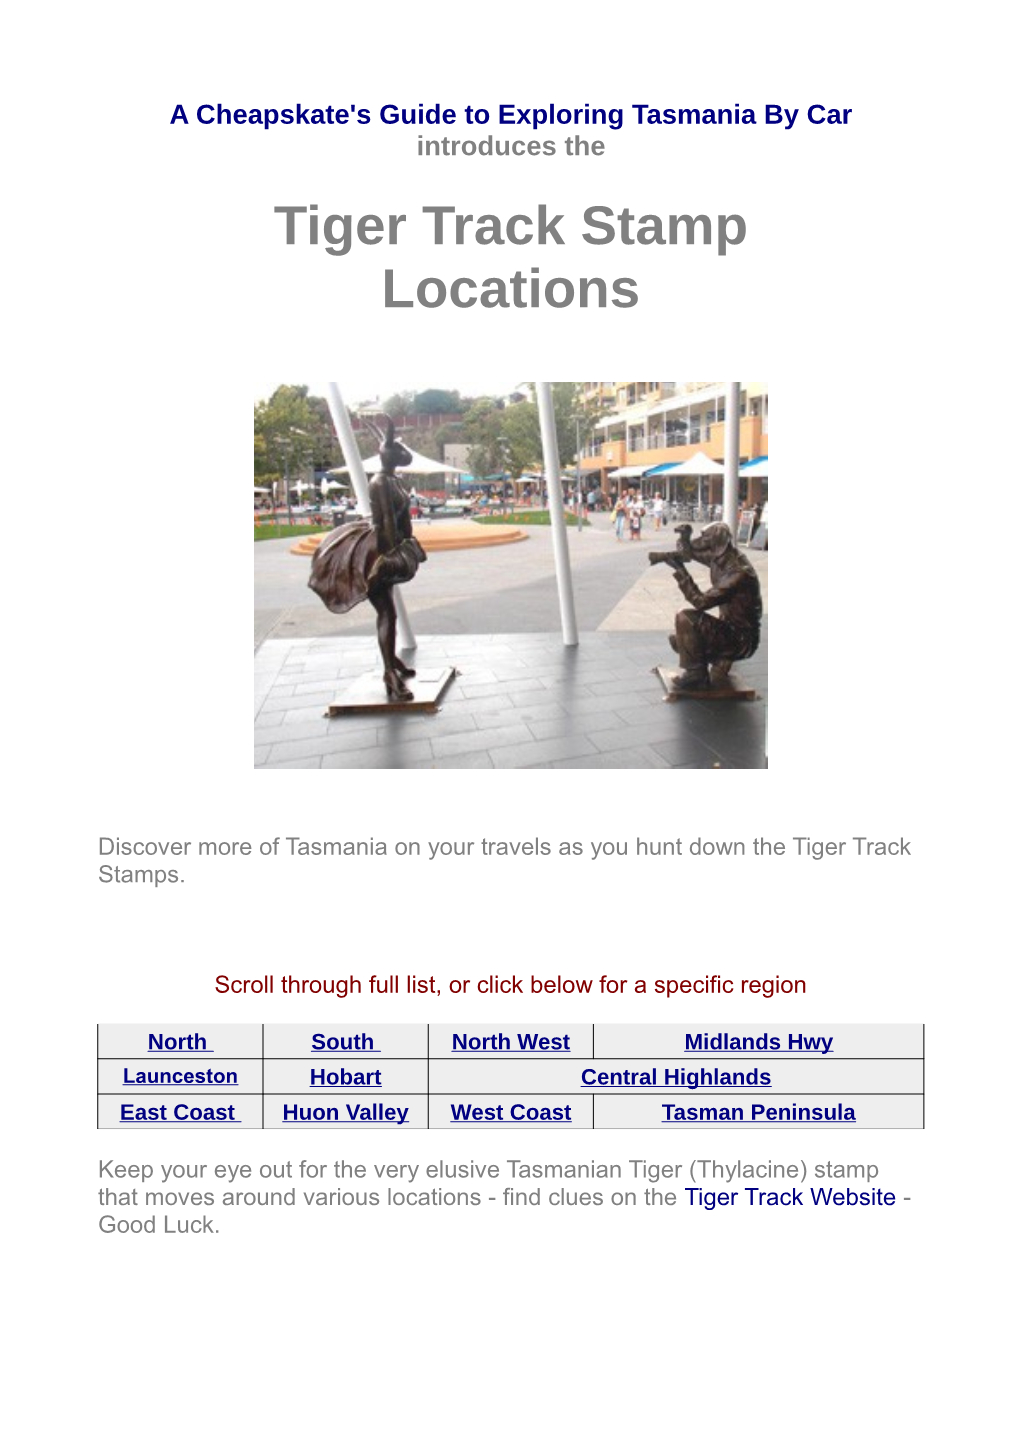 Tiger Track Stamp Locations